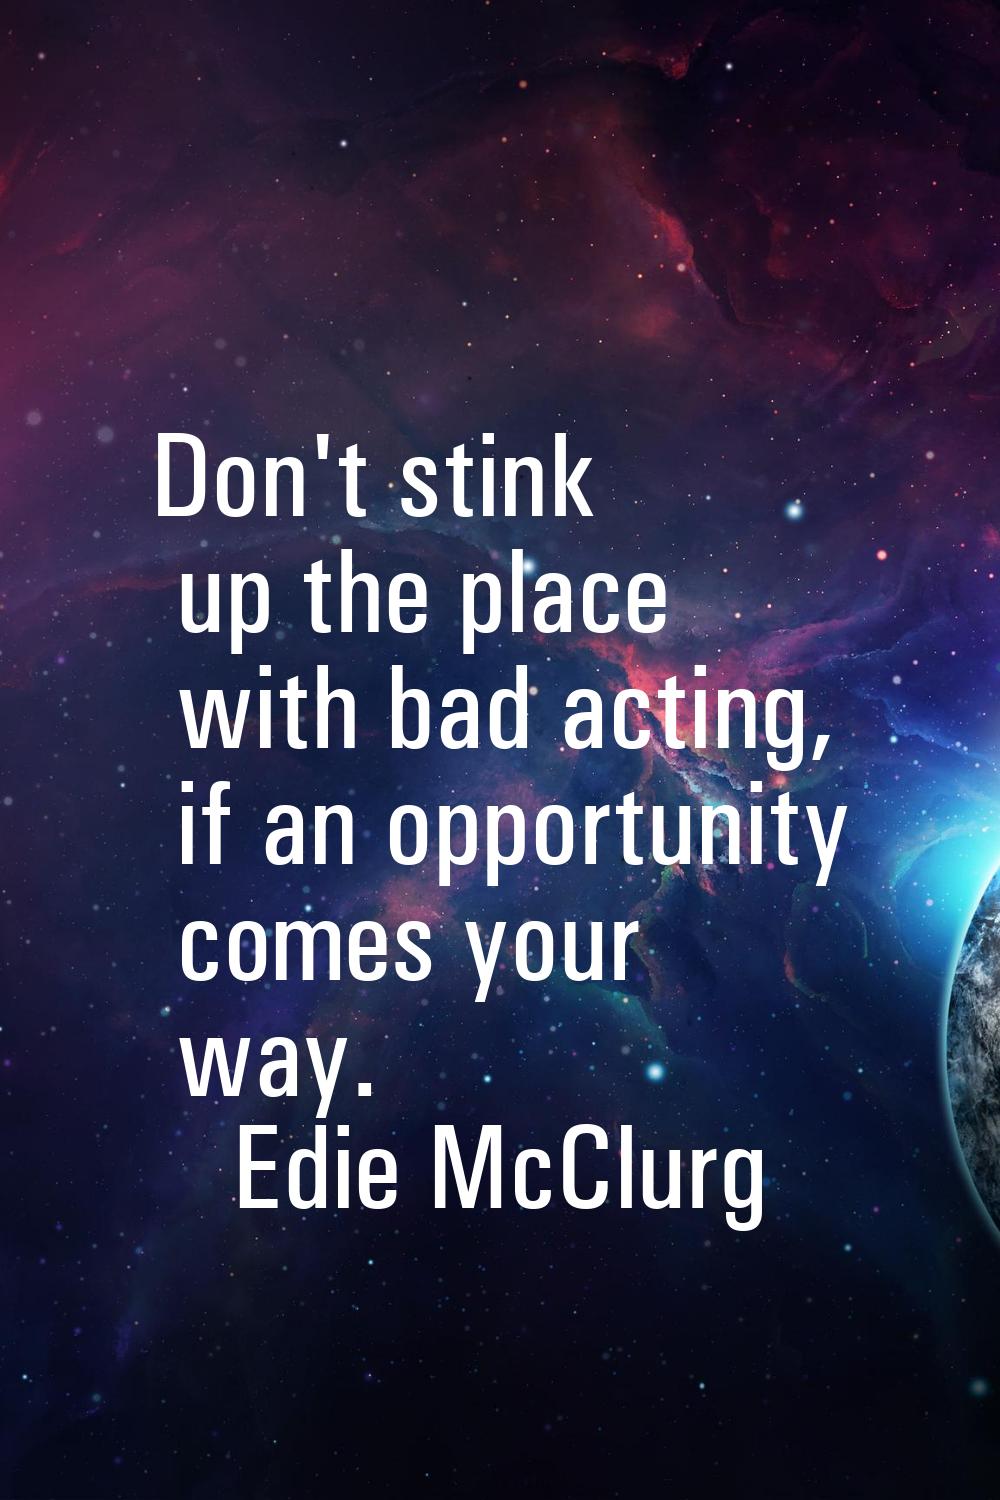 Don't stink up the place with bad acting, if an opportunity comes your way.